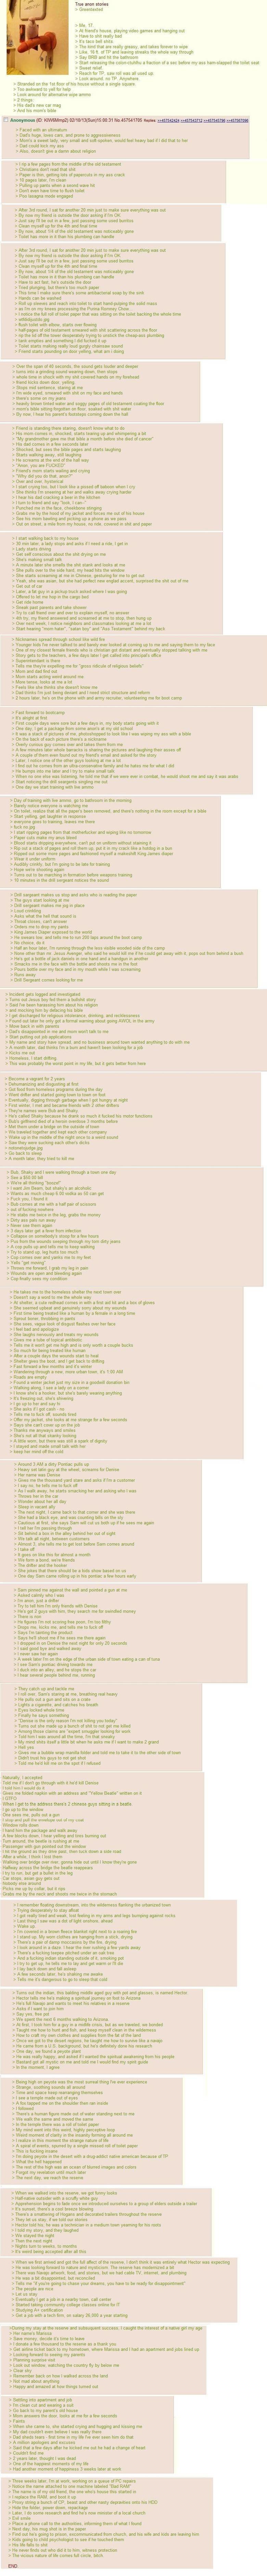 My favorite greentext of all time. This is movie material. True anon stones Greenjester Me IT At (Hand' s house, playng new games and haning our Haven) she real